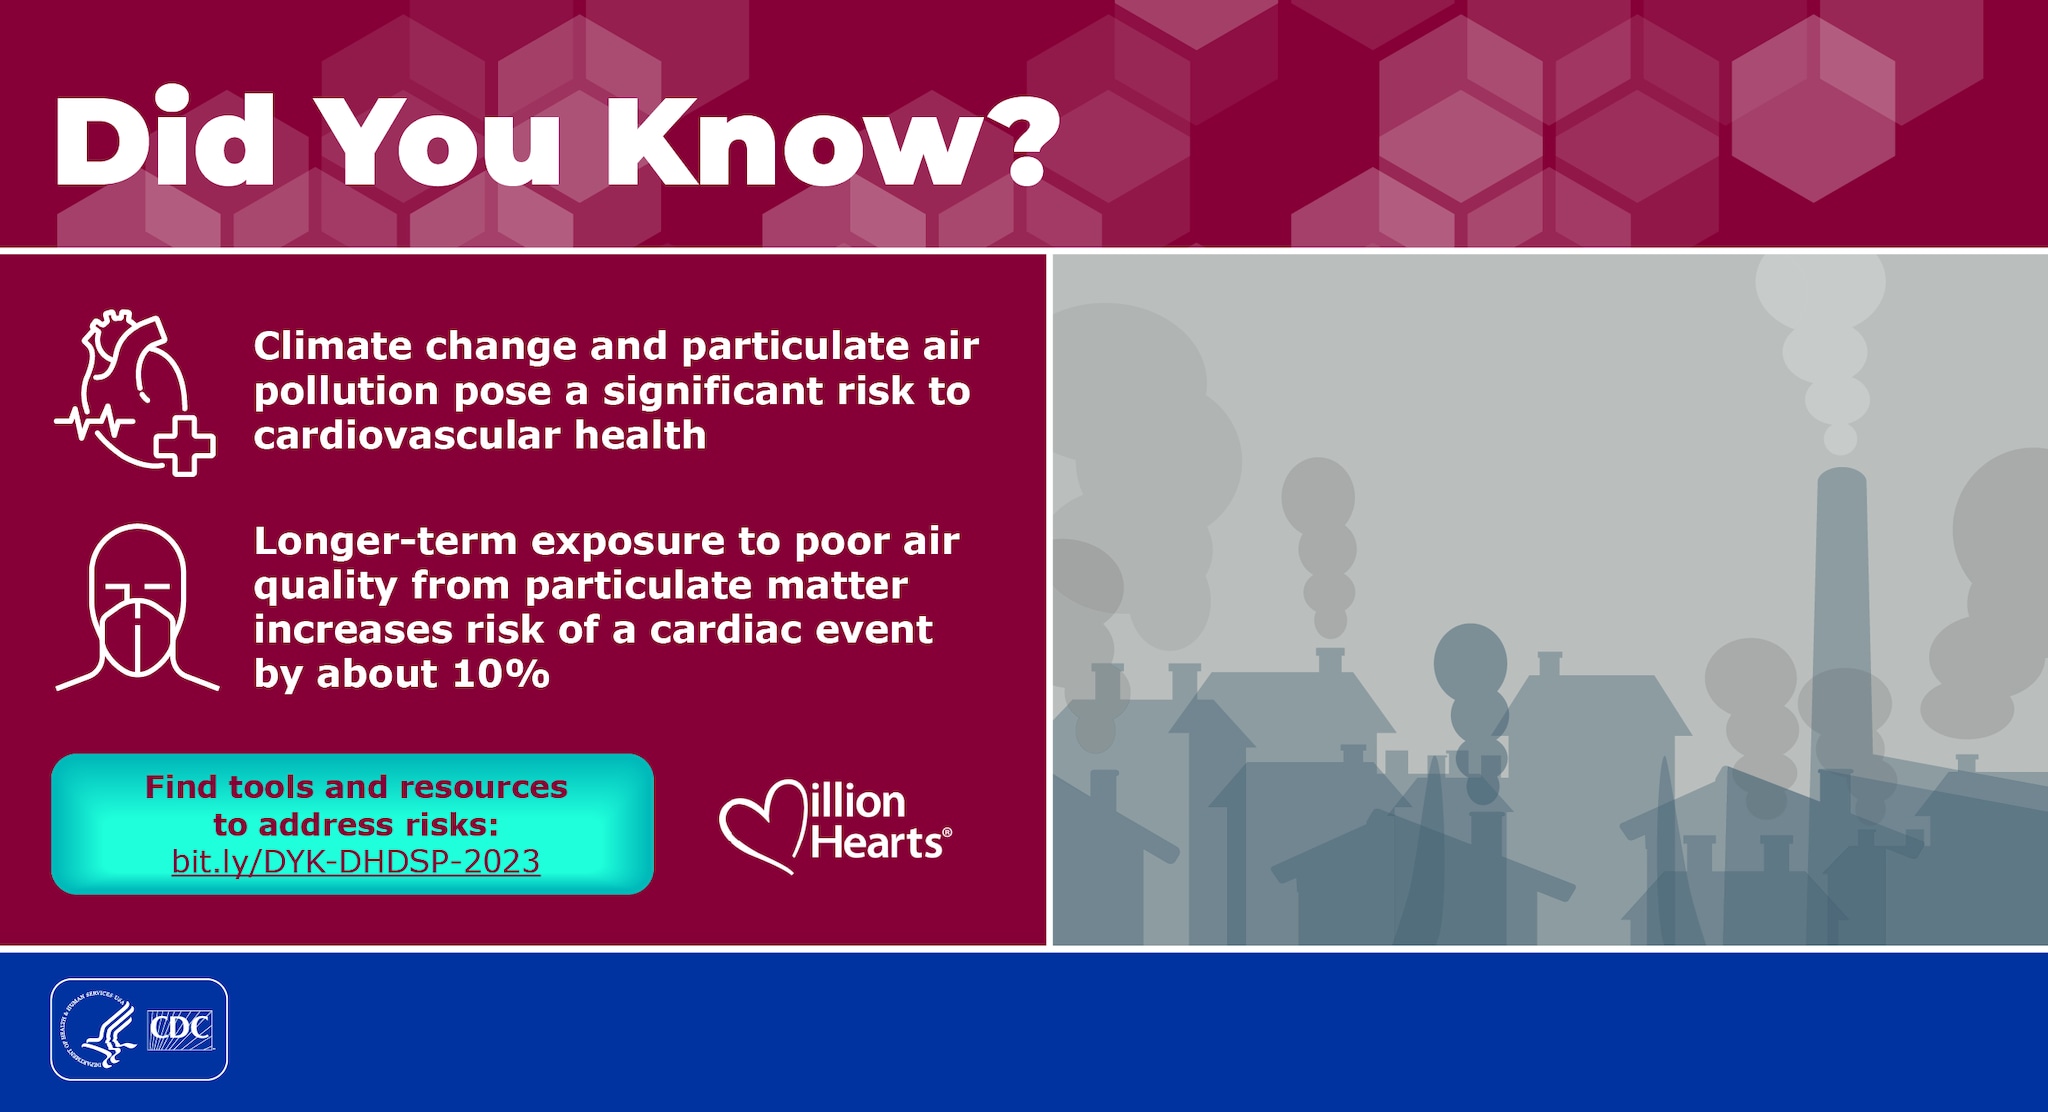 An infographic titled Did You Know? Text says: Climate change and particulate air pollution pose a significant risk to cardiovascular health. Longer-term exposure to poor air quality from particulate matter increases risk of a cardiac event by about 10%. Find tools and resources to address risks at bit.ly/DYK-DYDSP-2023.